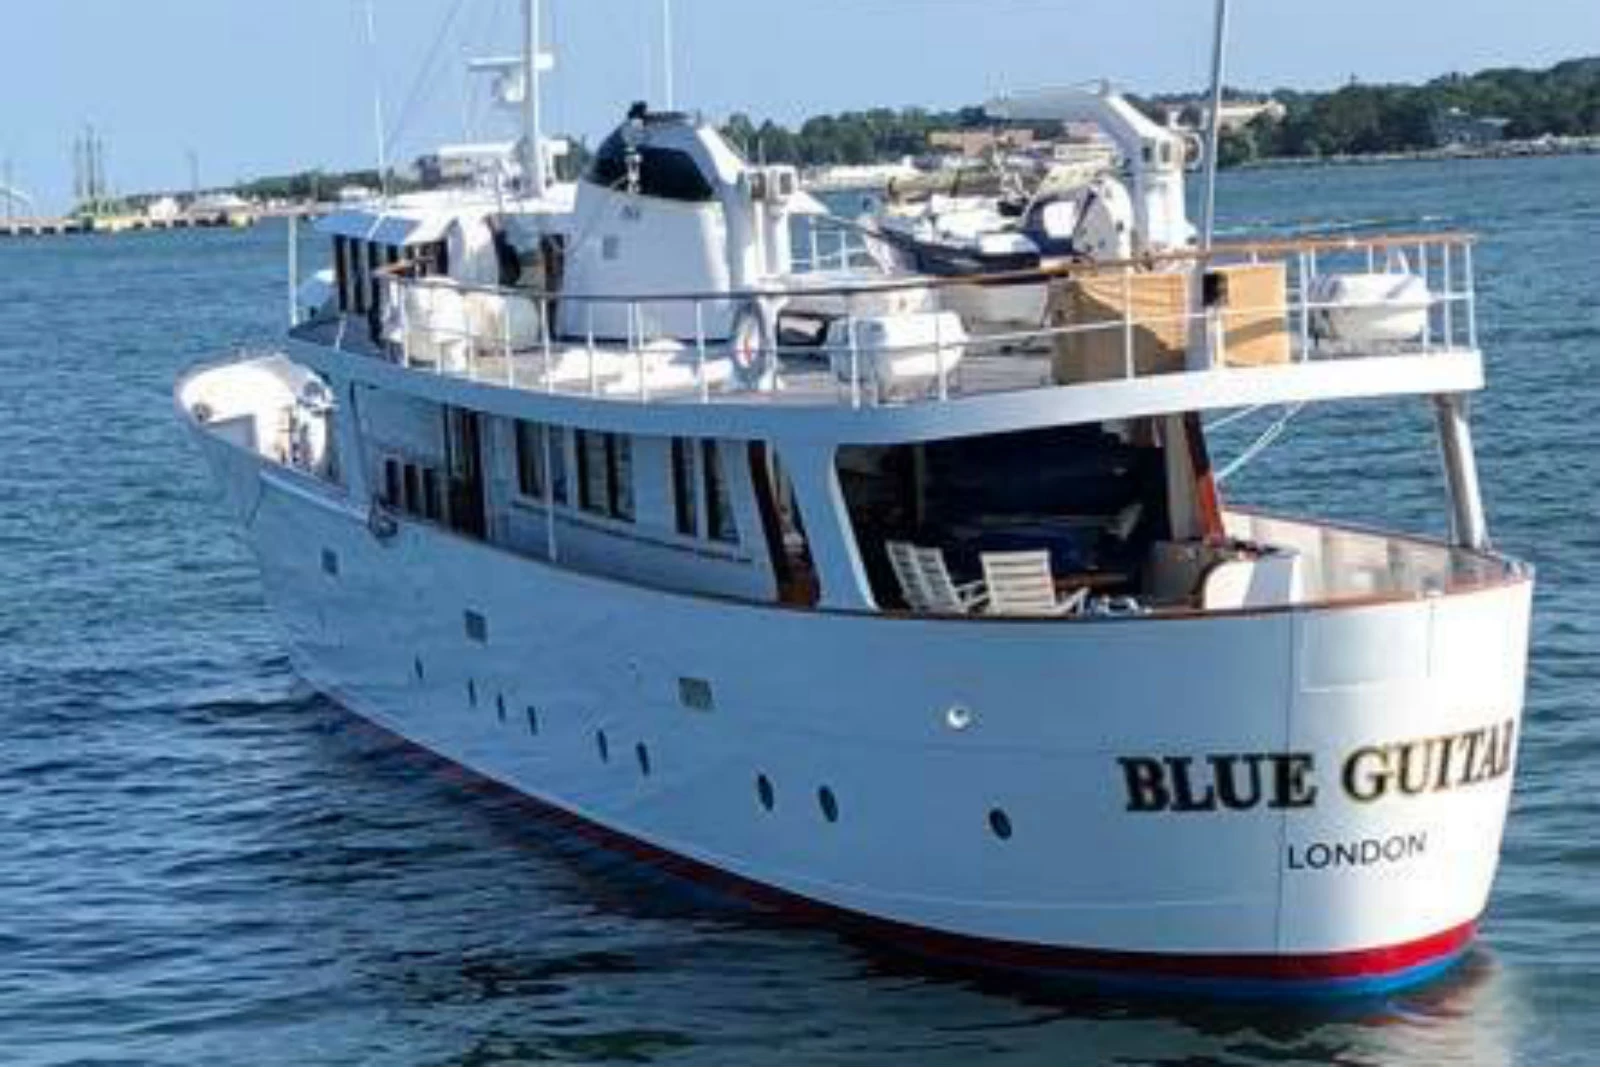 blue guitar yacht owner